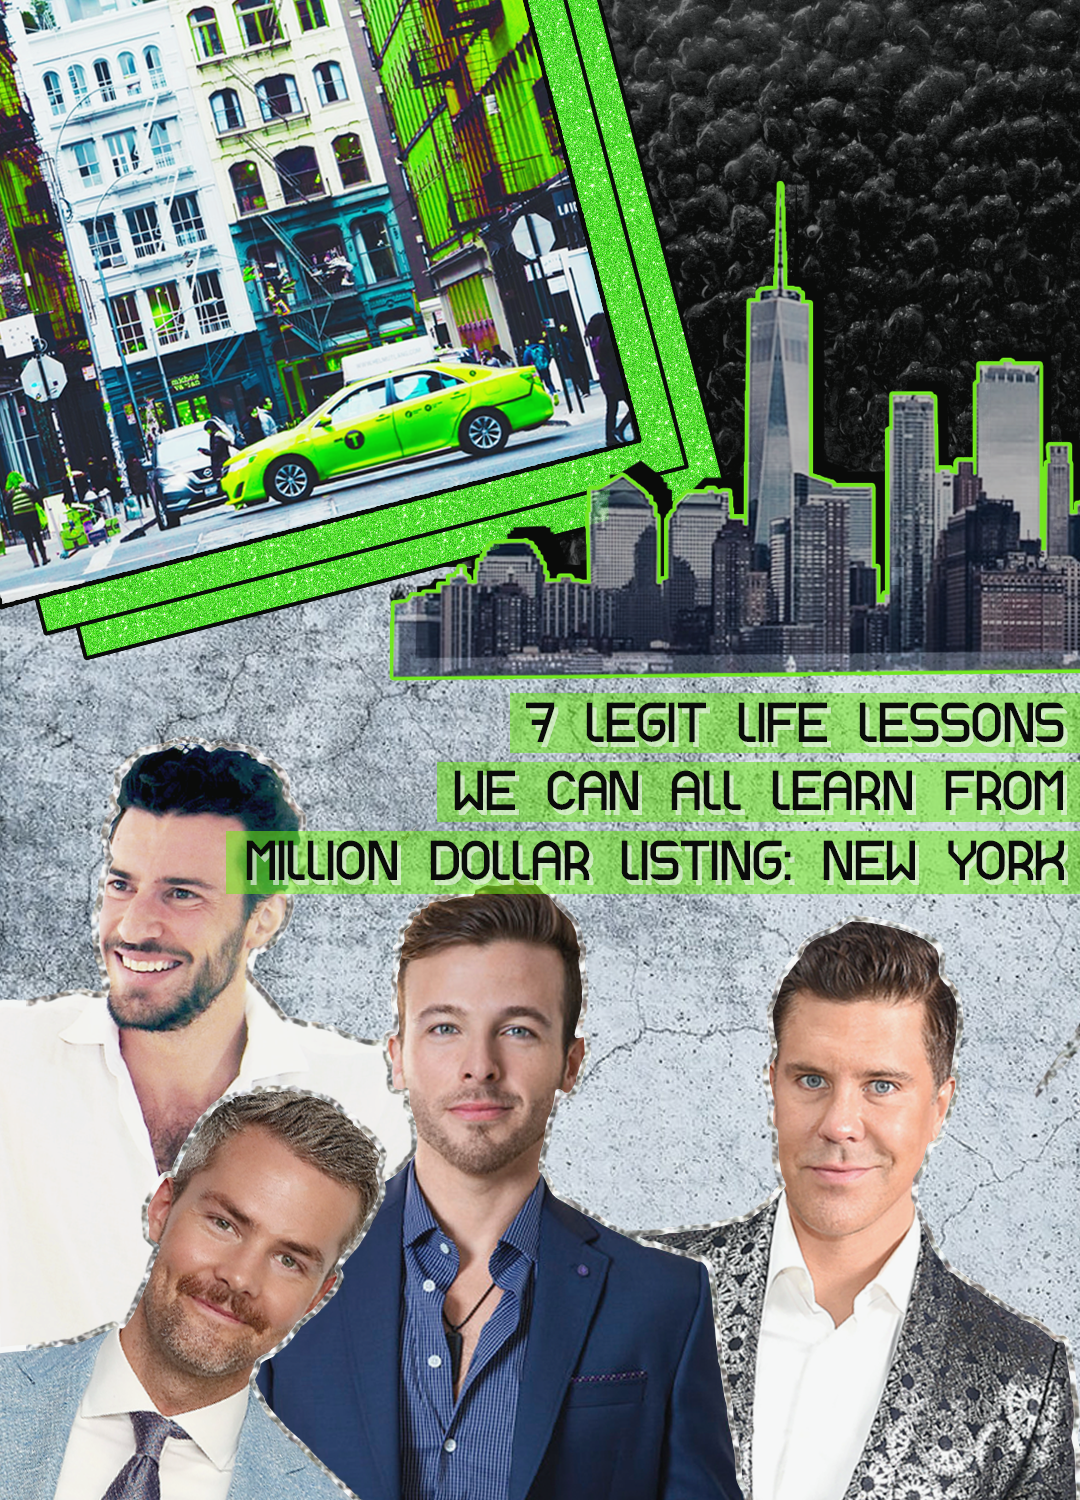 life lessons from Million Dollar Listing New York cast